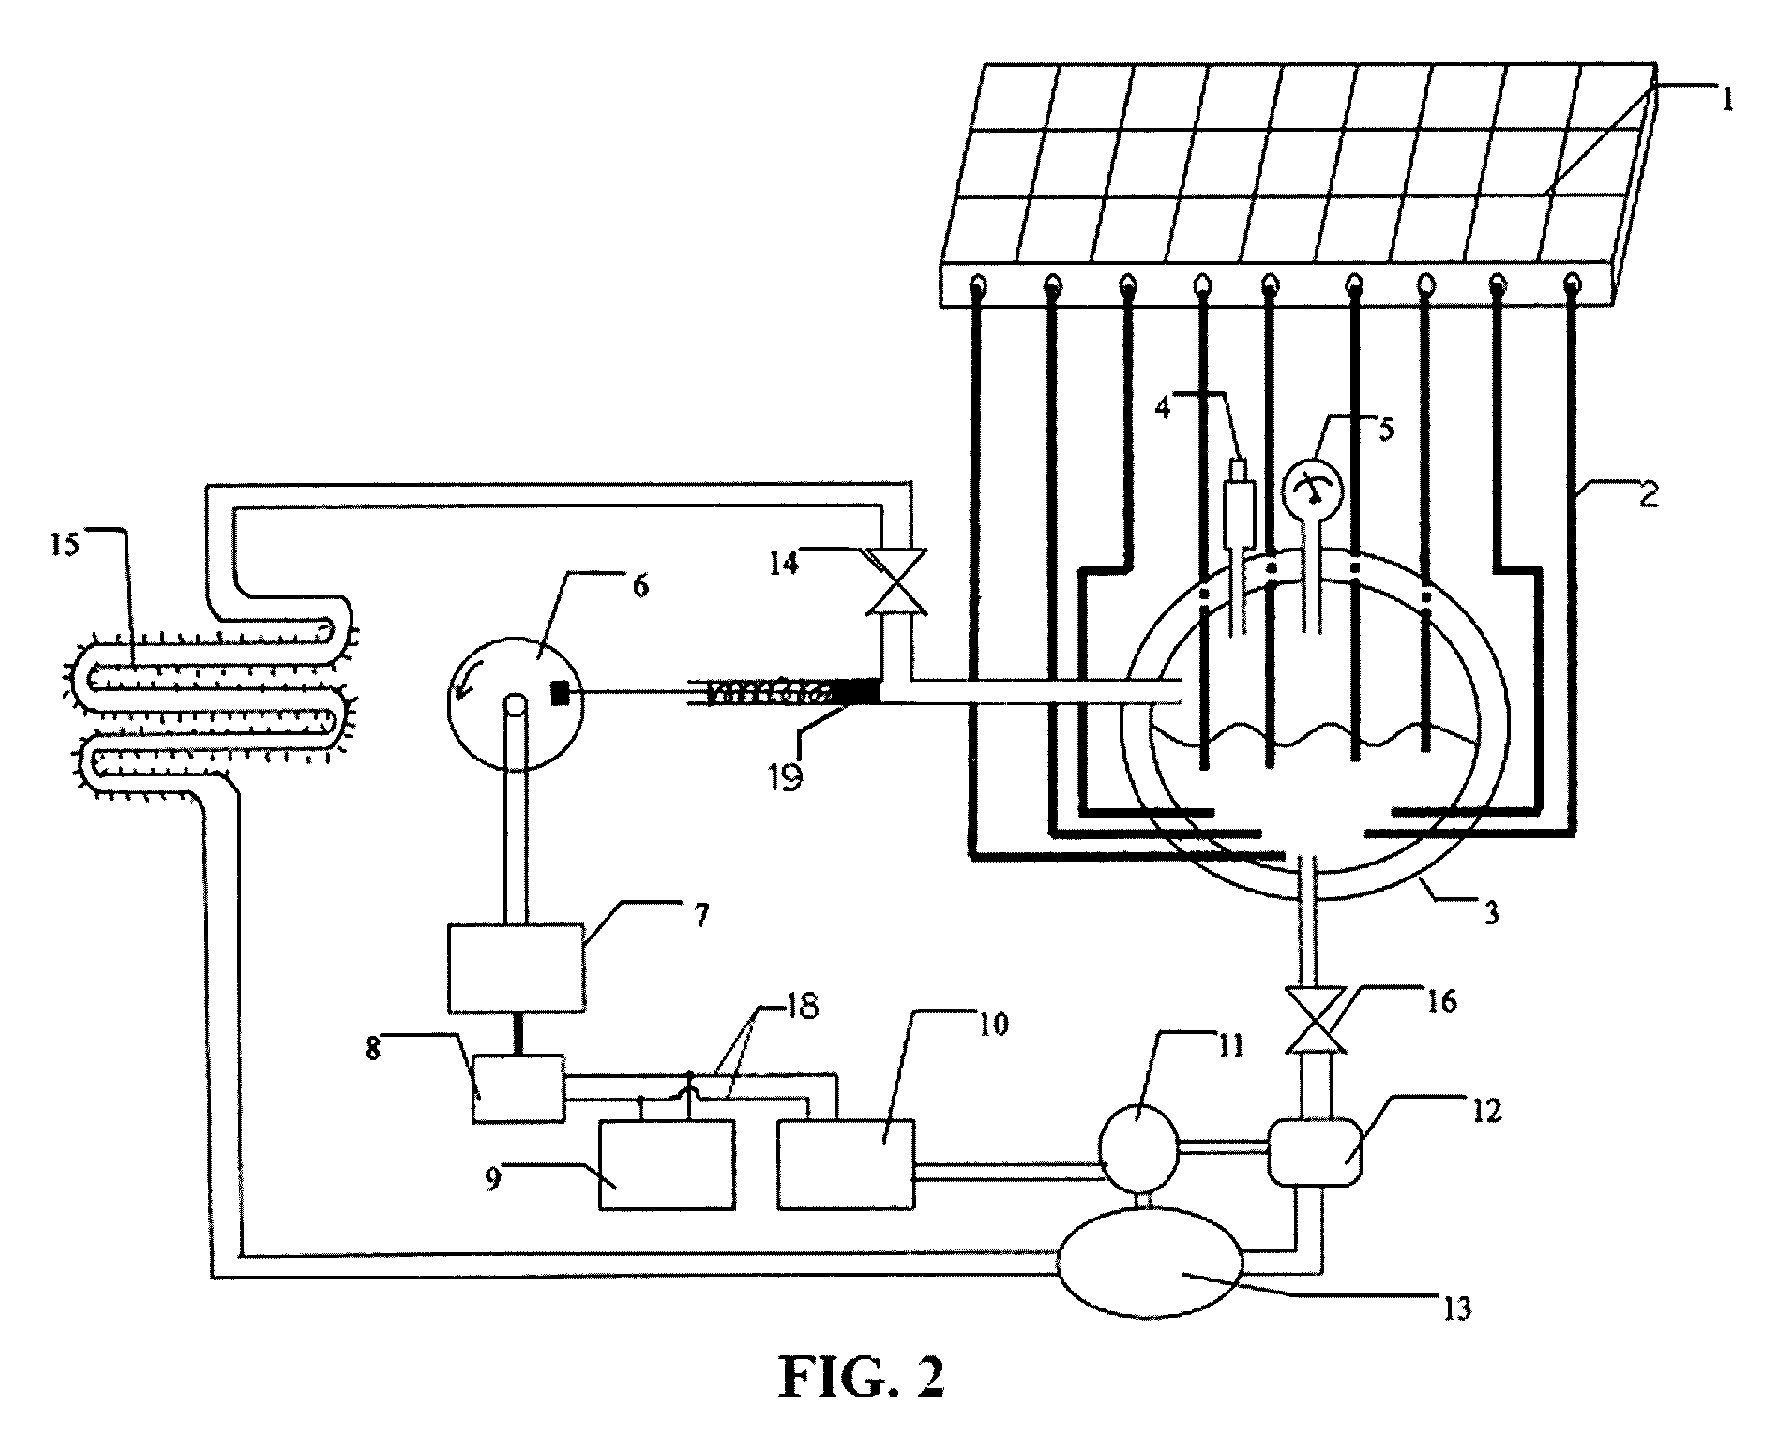 Method of generating power from naturally occurring heat without fuels and motors using the same